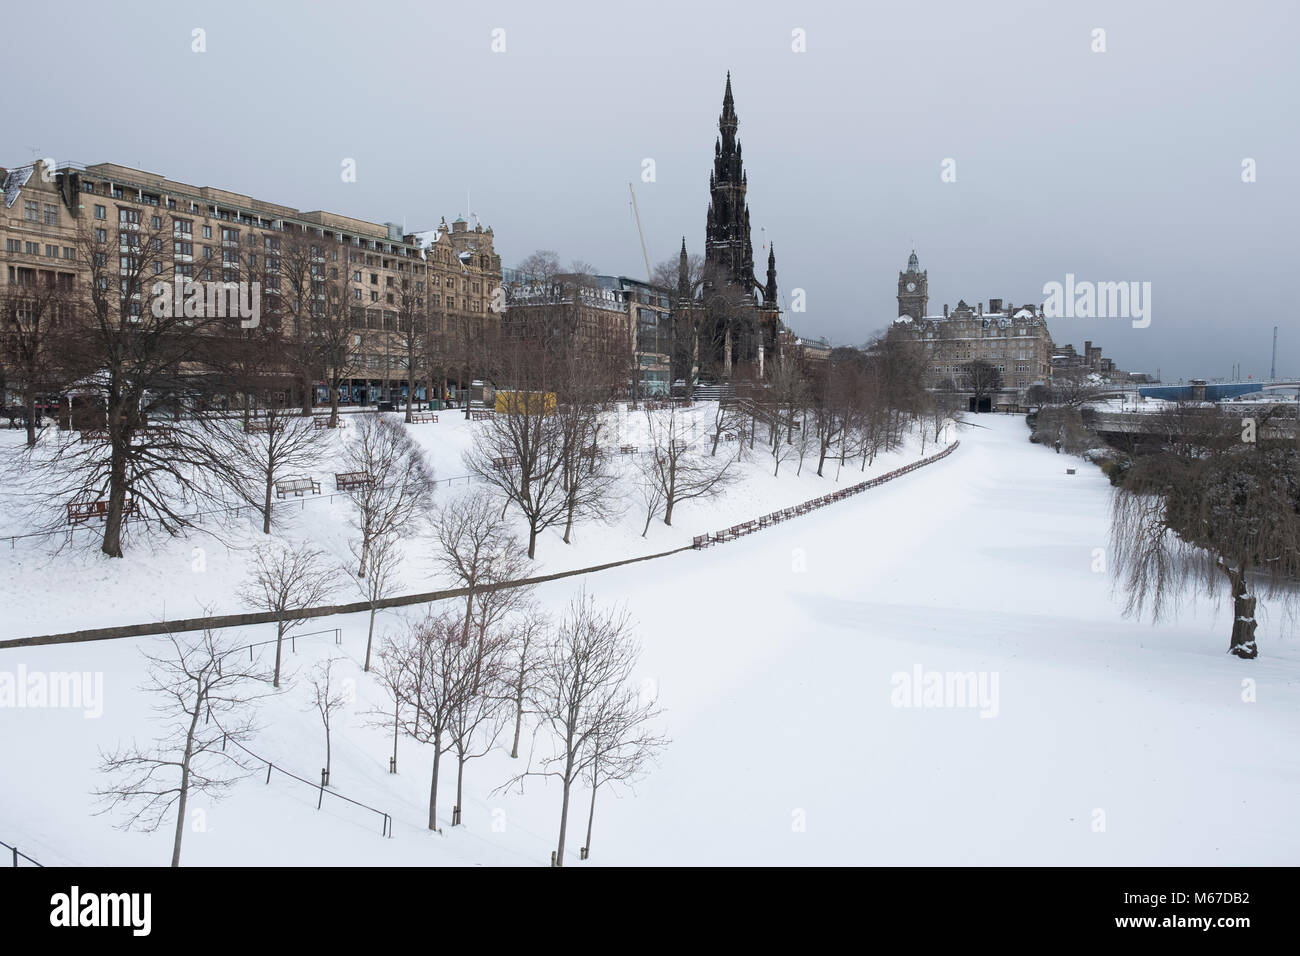 Edinburgh, Scotland, United Kingdom, 1 March, 2018. Heavy snowfalls continue across the city from the storm known as The Beast from the East. Most shops are closed and transport services have been cancelled. Pictured; Princes Street Gardens closed to the public leaving snow pristine. Credit: Iain Masterton/Alamy Live News Stock Photo